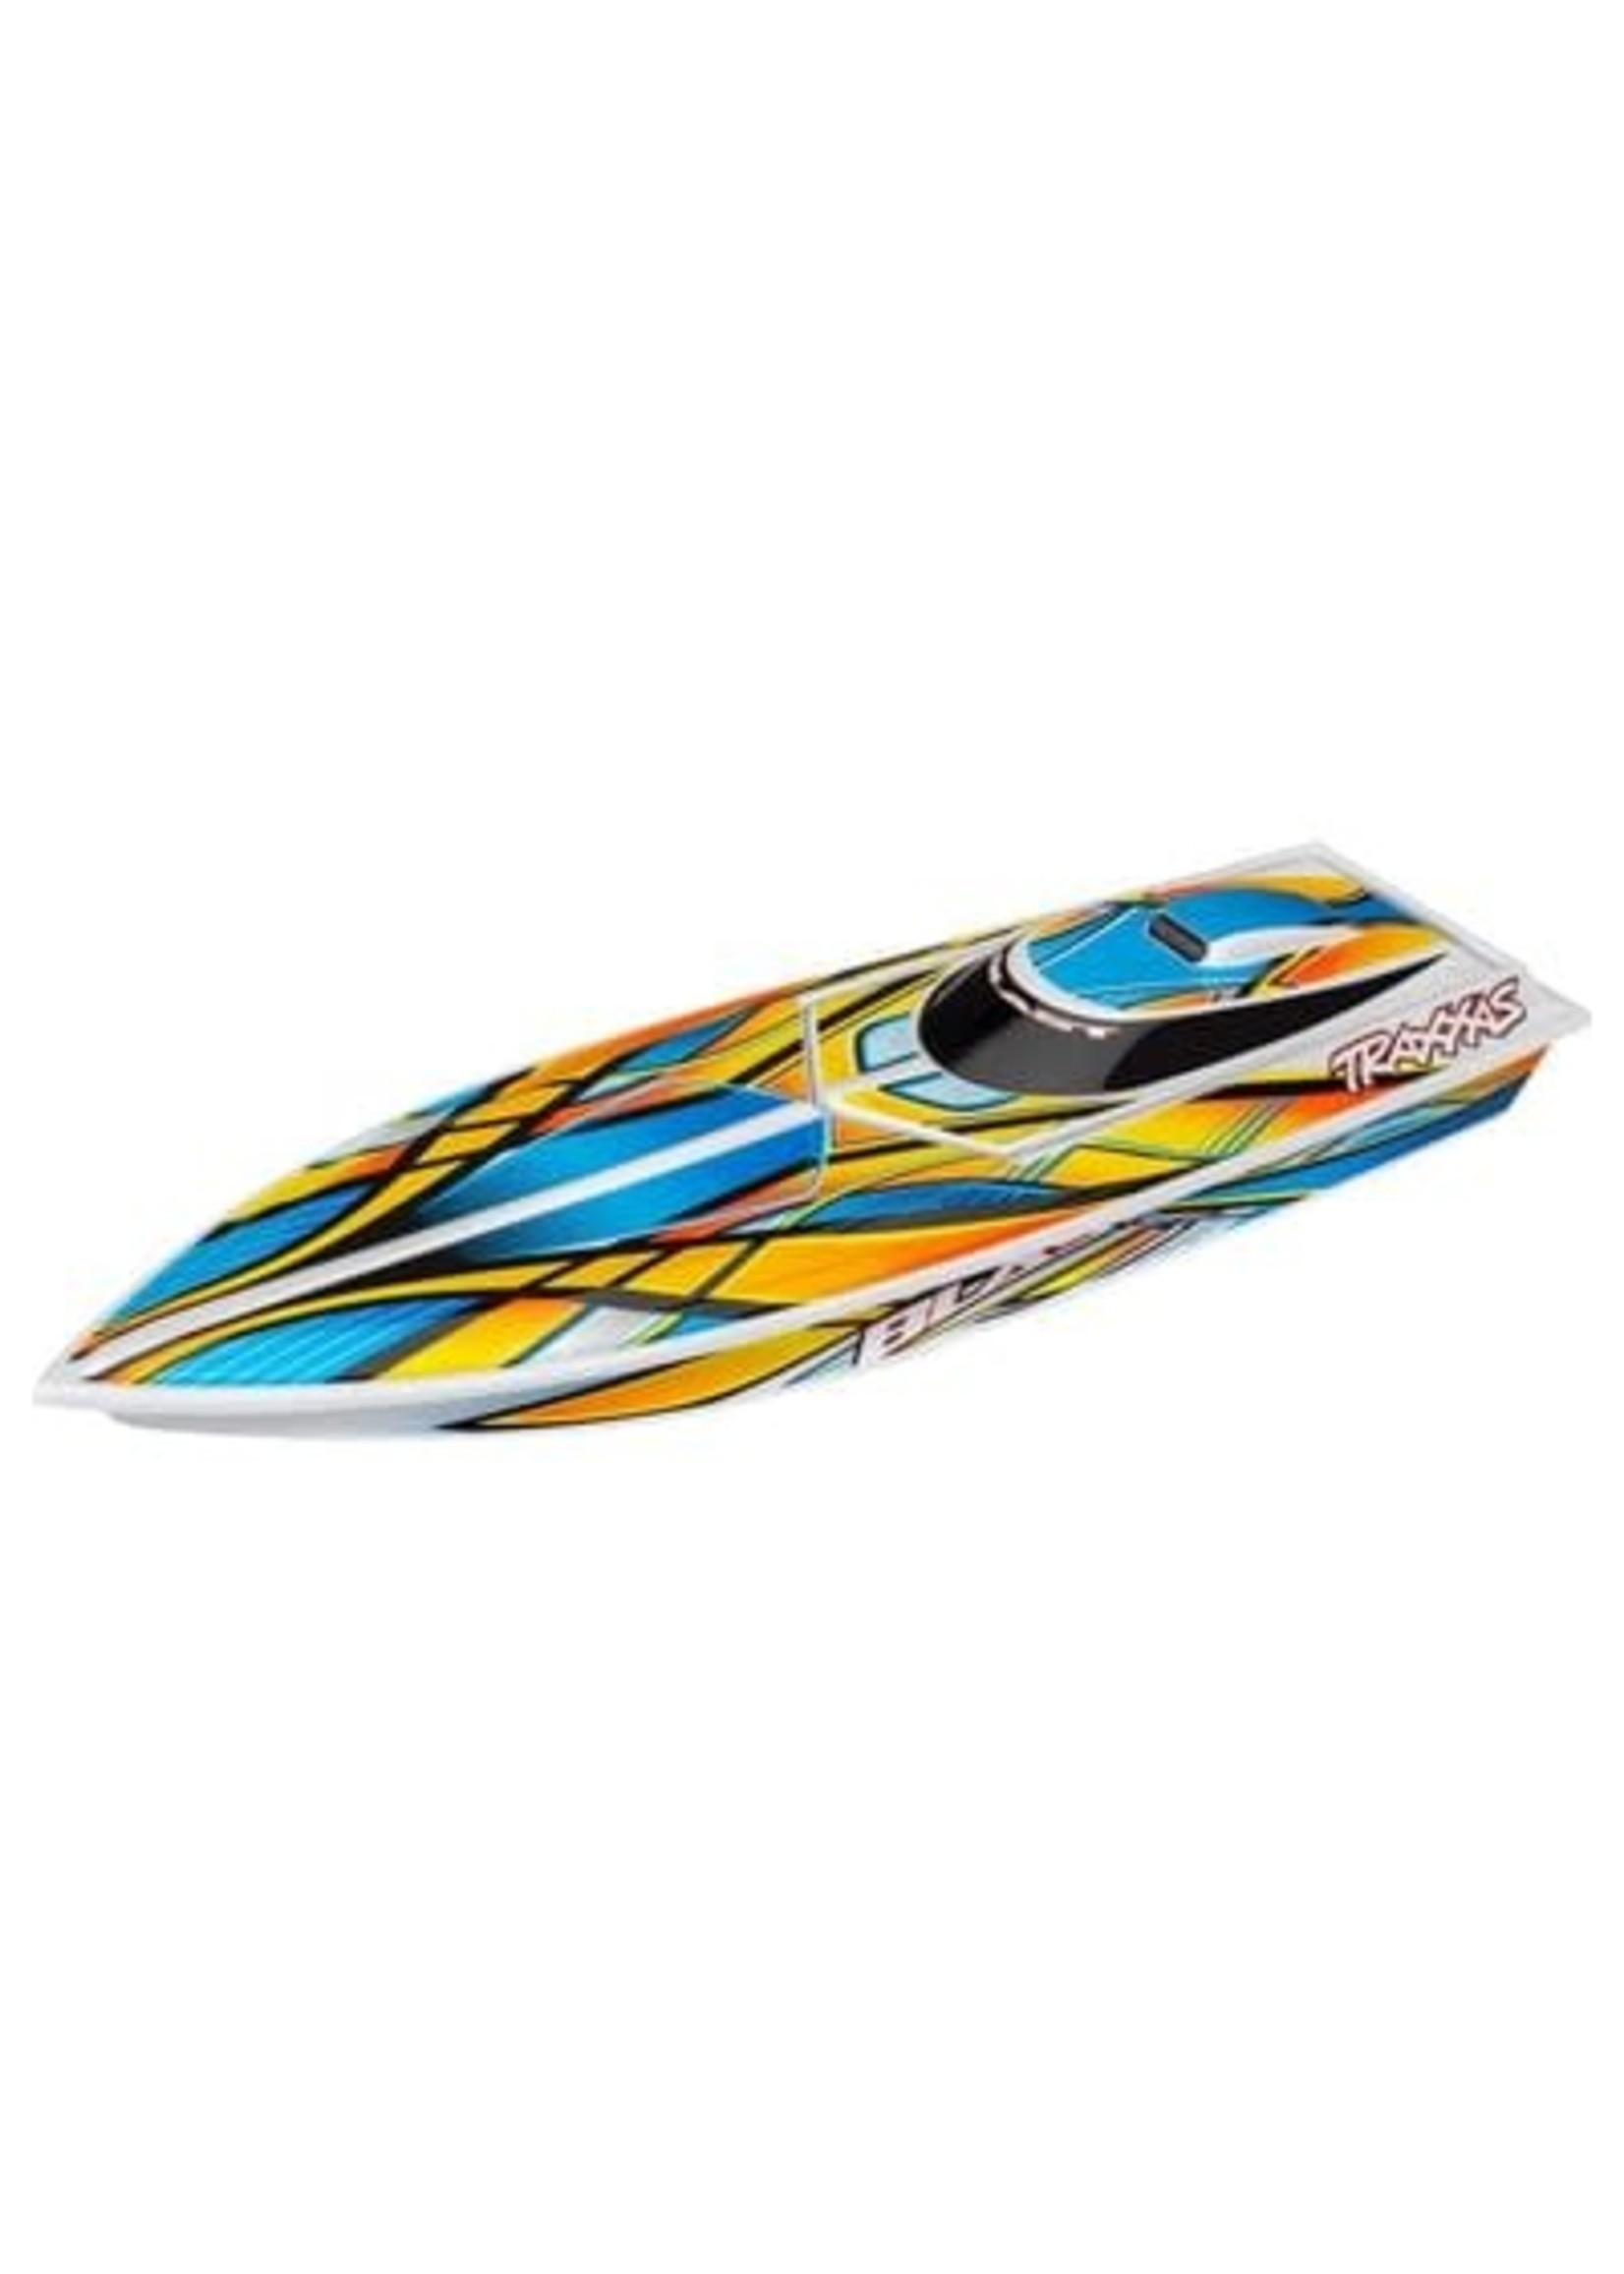 Traxxas 38104-1-ORNG Blast: High Performance Race Boat with TQ 2.4GHz radio system